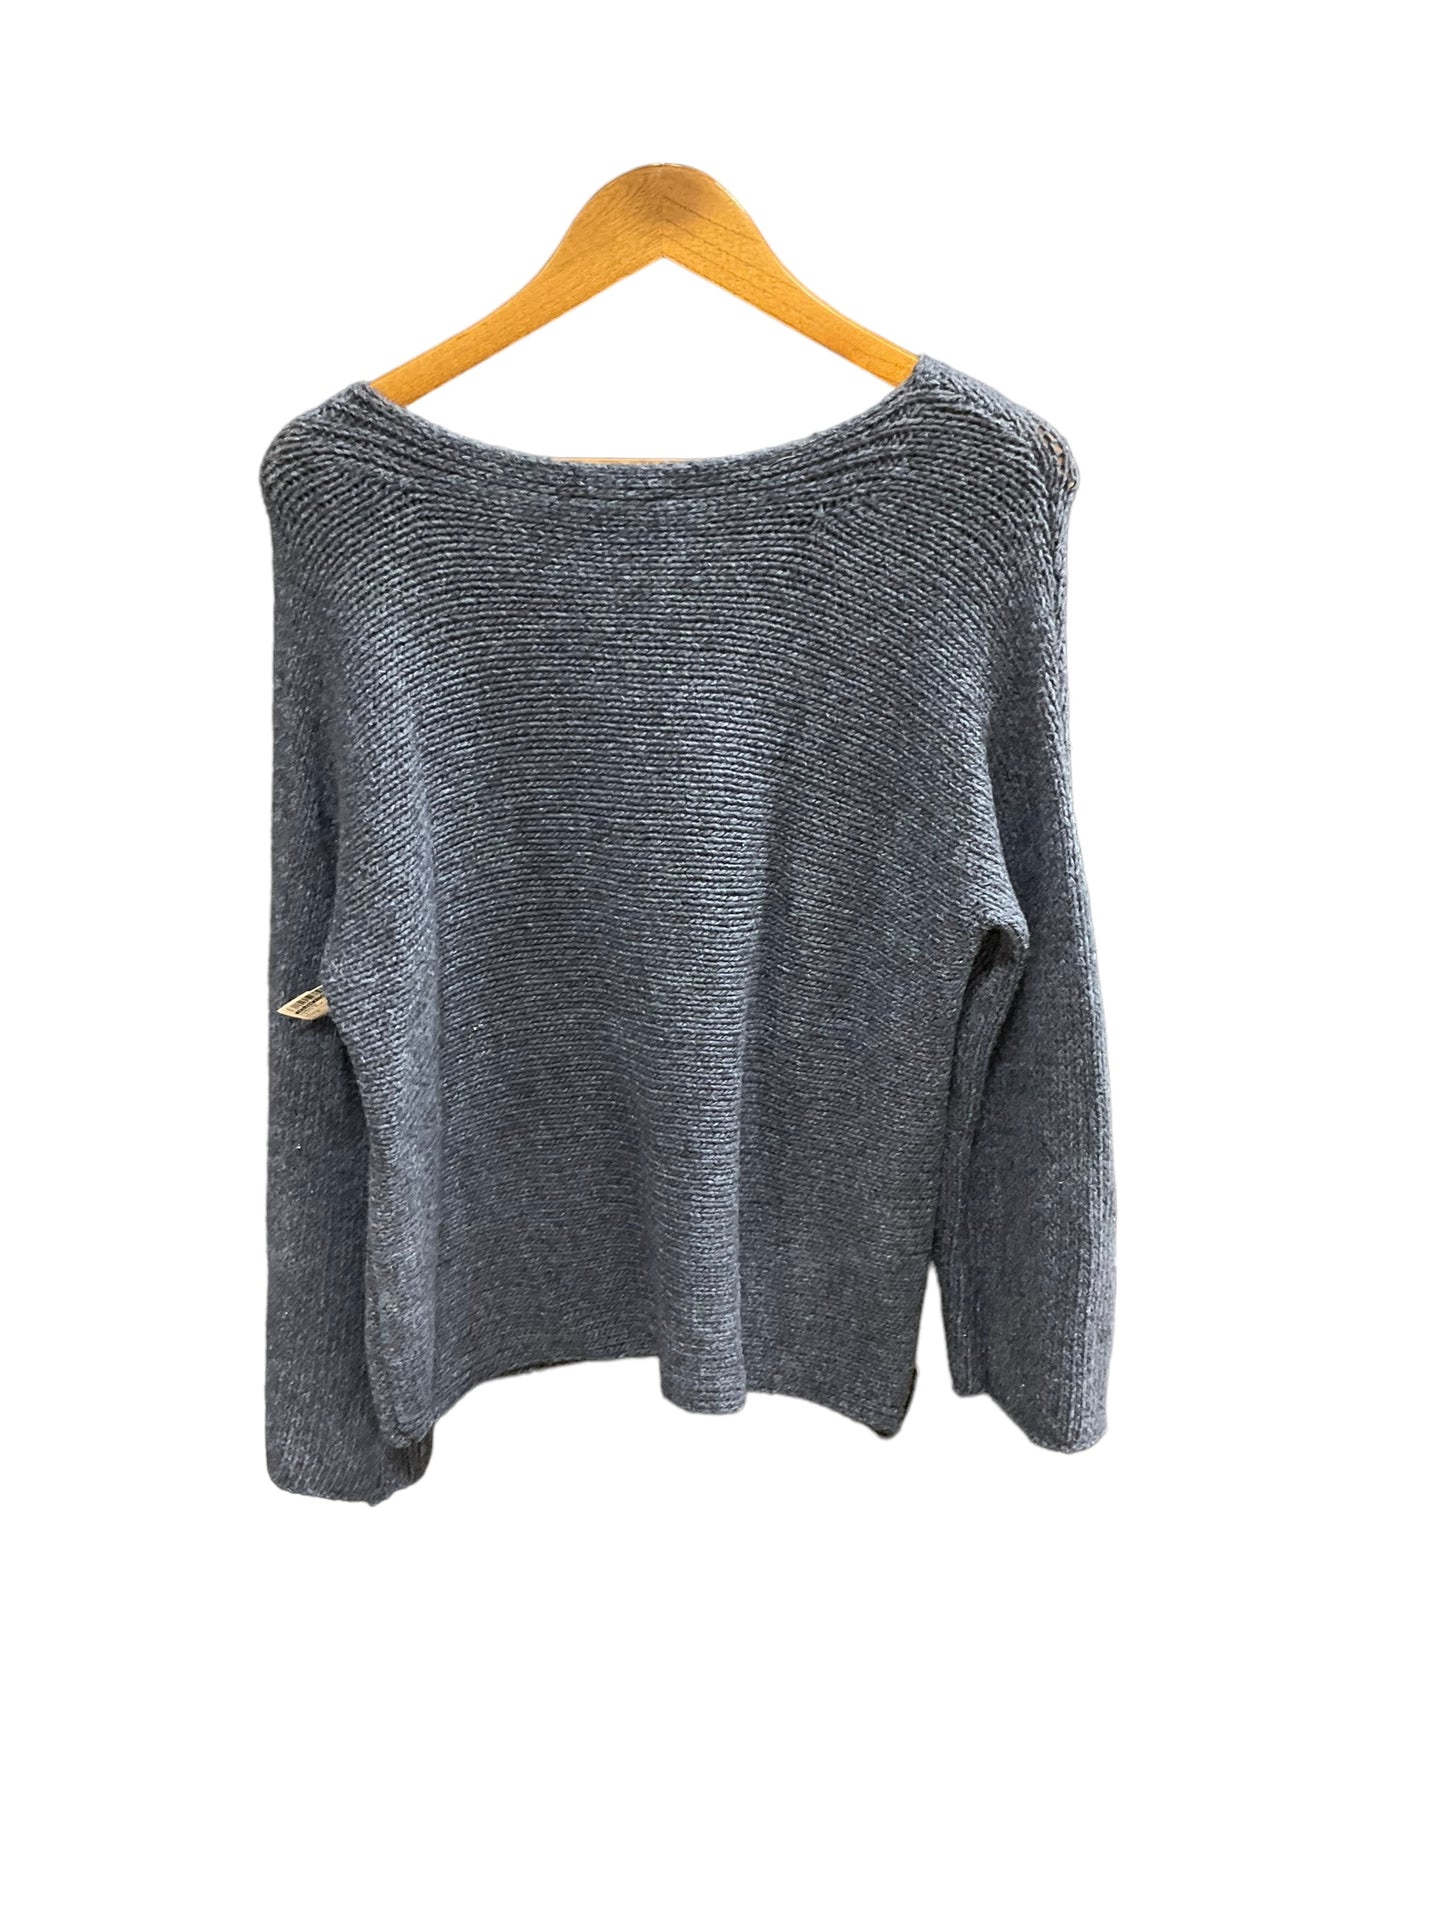 Sweater By Eileen Fisher  Size: S